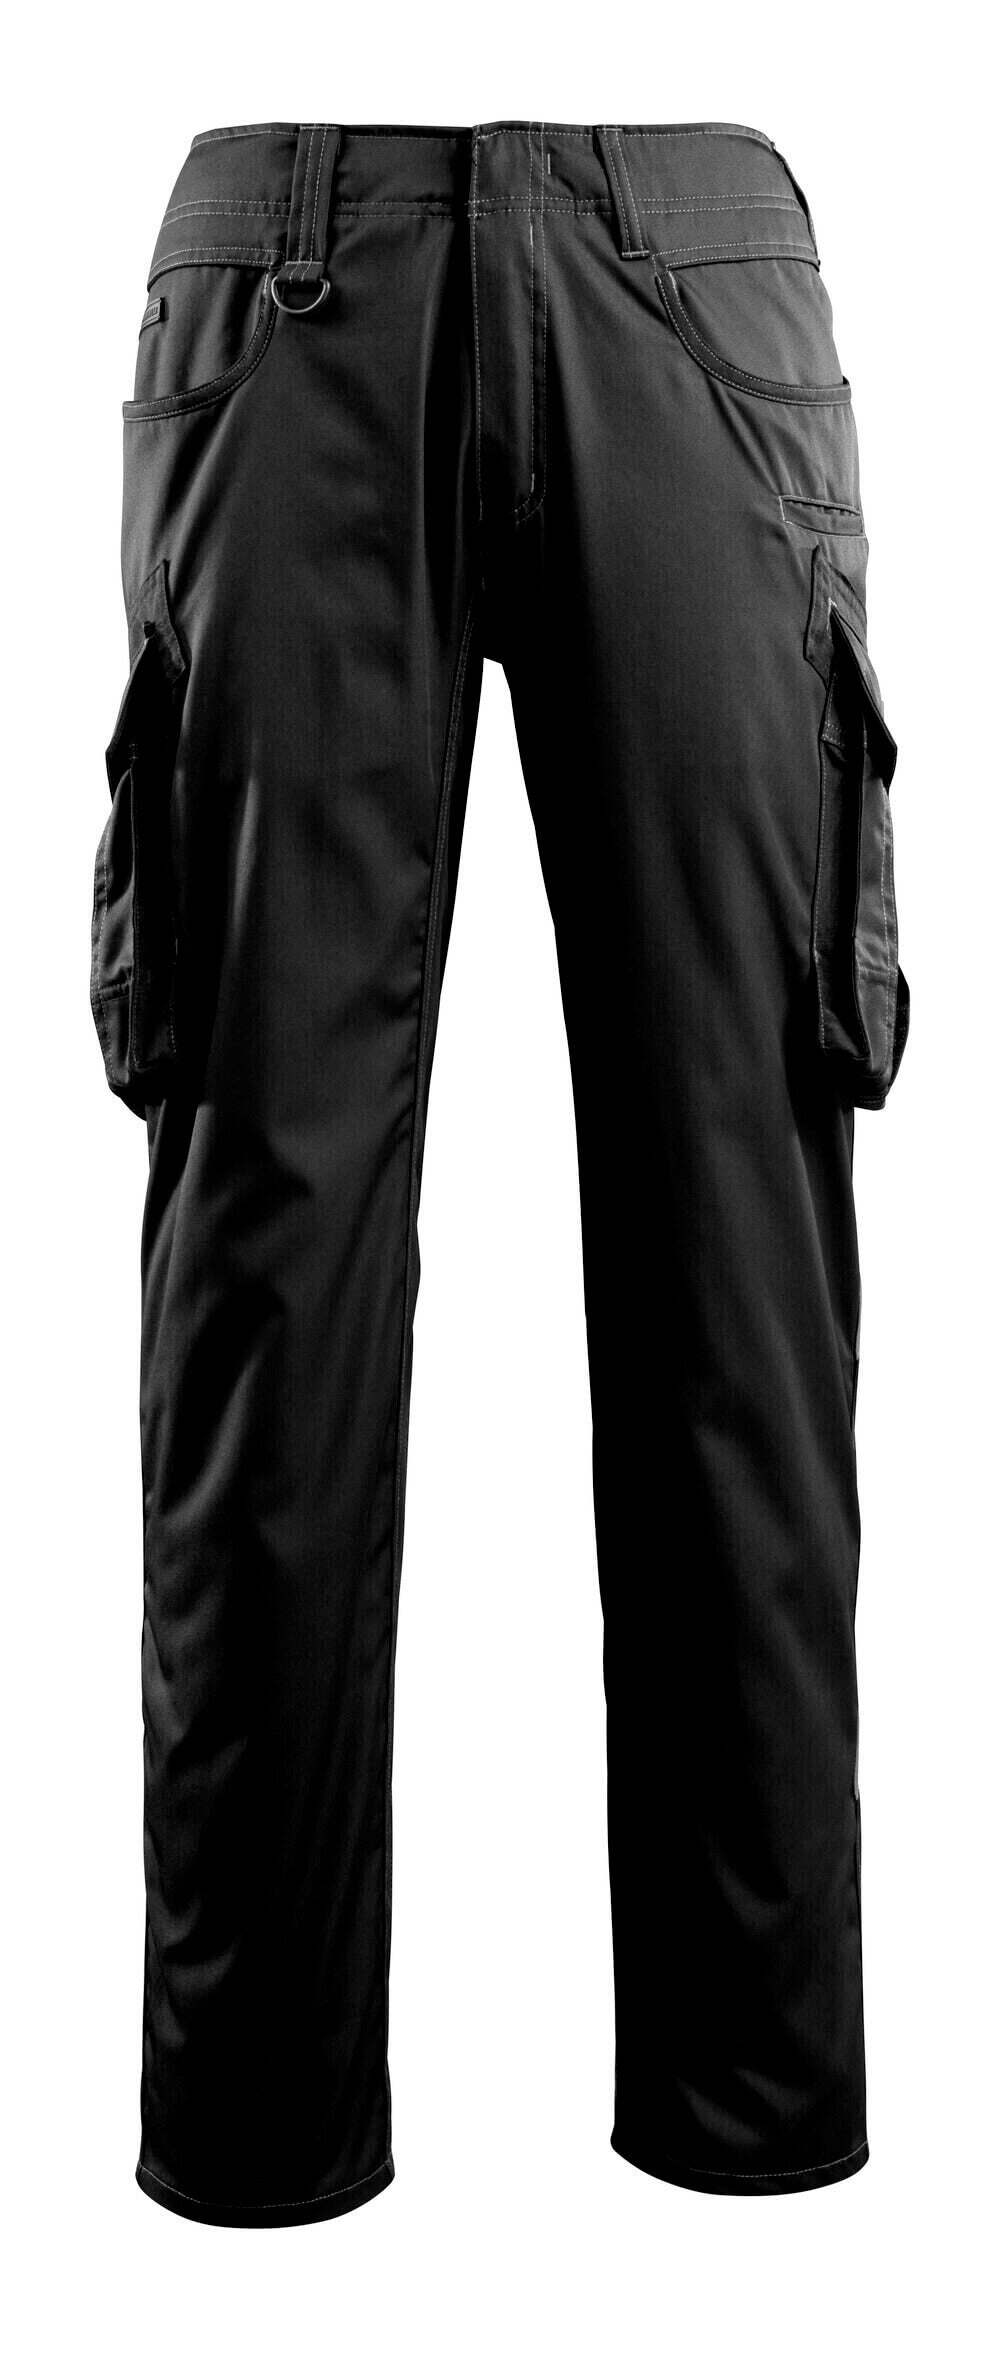 MASCOT®UNIQUE Trousers with thigh pockets Ingolstadt 16179 - DaltonSafety